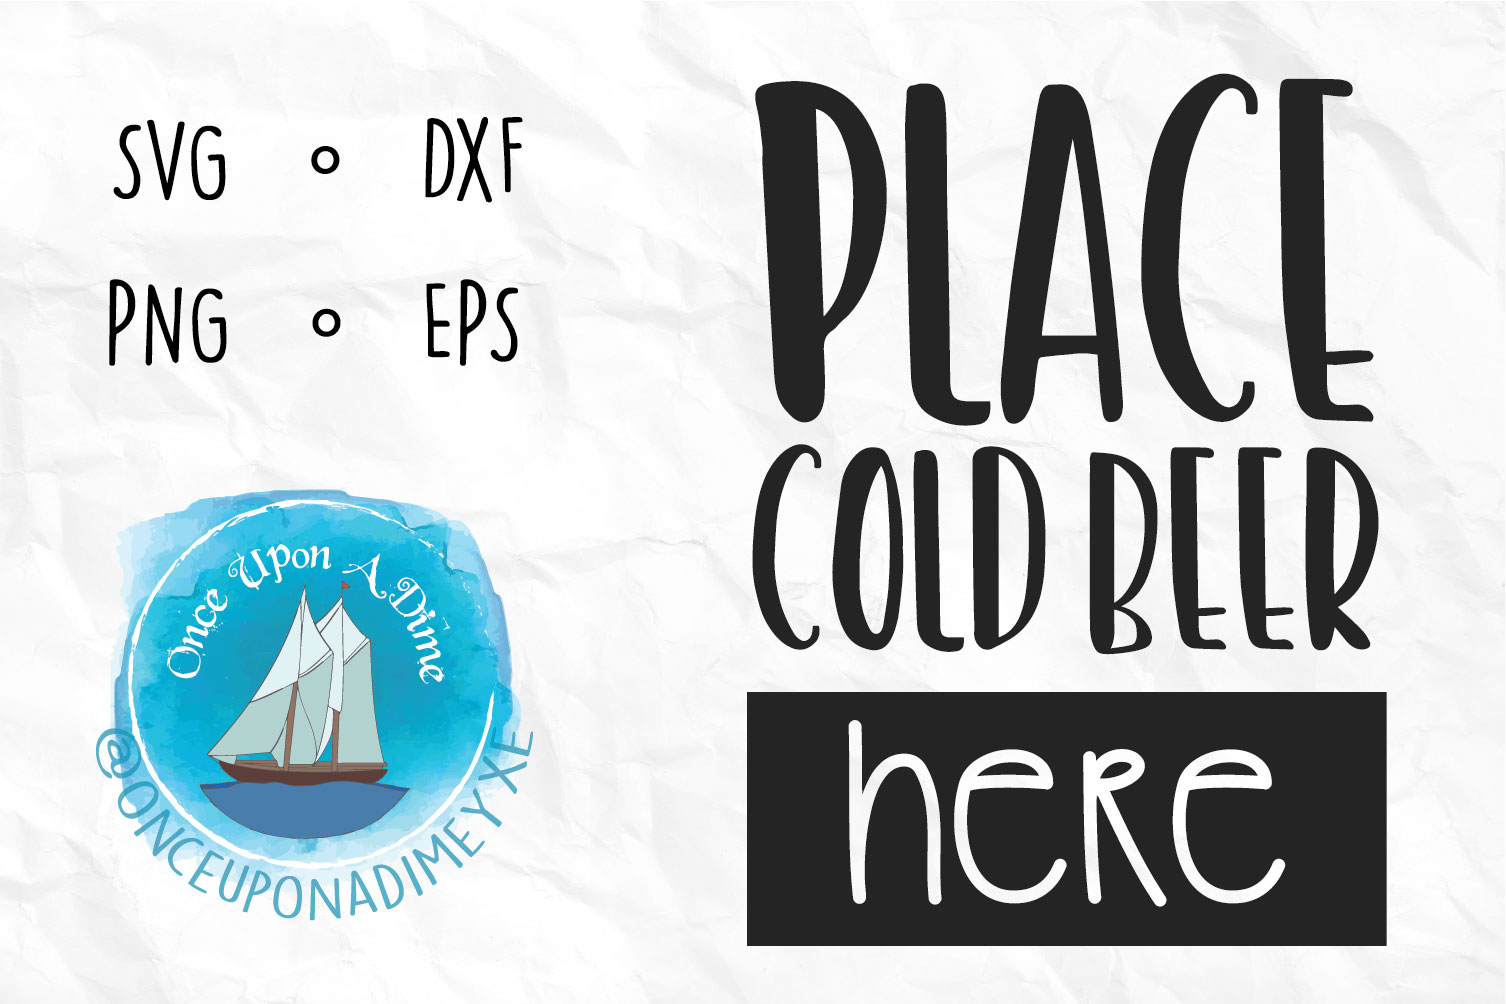 Download Place Cold Beer Here | Beer | Drinking SVG Cut File